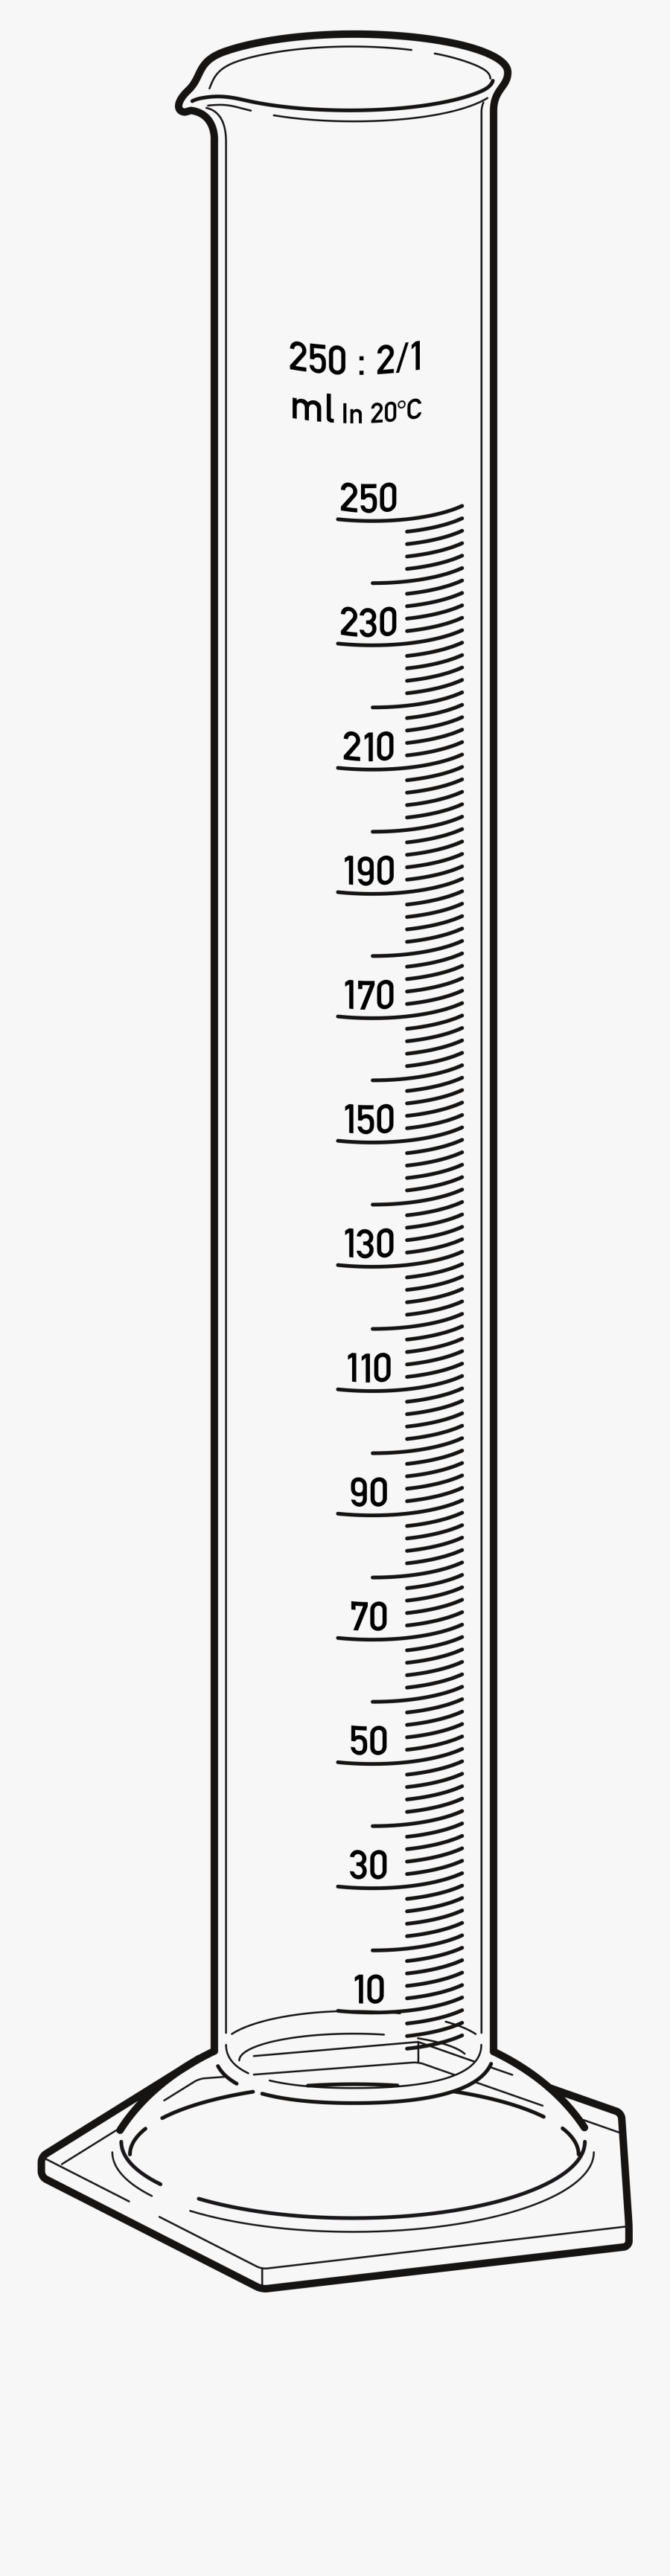 28 Collection Of 100 Ml Graduated Cylinder Drawing - 100ml Measuring Cylinder Diagram, Transparent Clipart